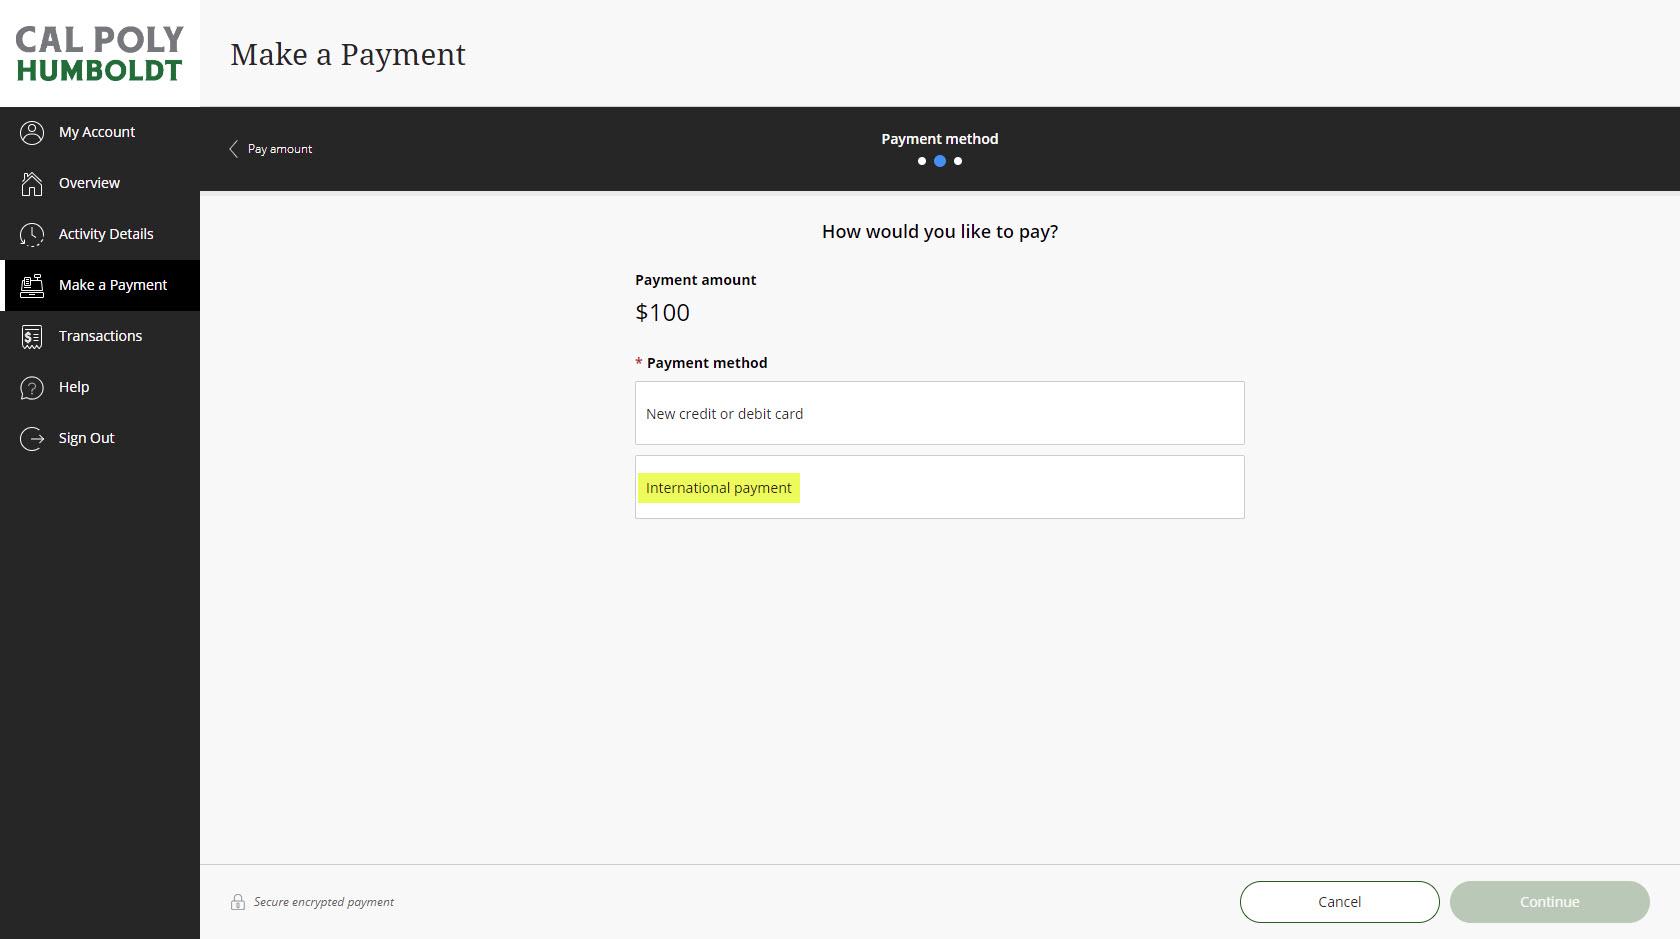 Image of Make a Payment page where you enter the amount to be paid